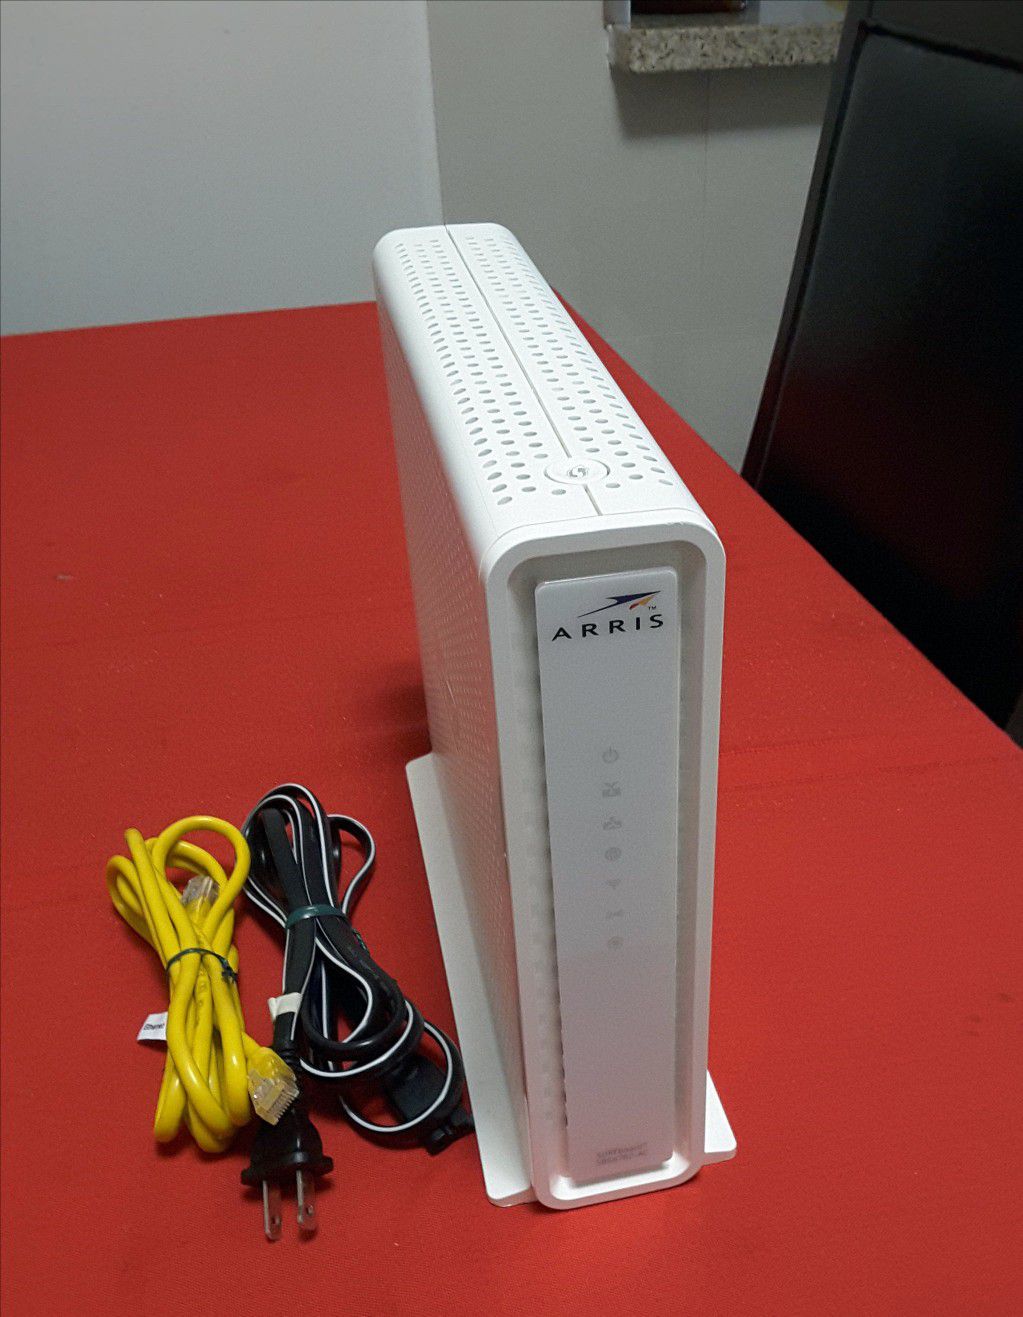 Cable Modem/Router Dual Band Arris SBG6782ACH Certified with Comcast Xfinity.   - Brand New.